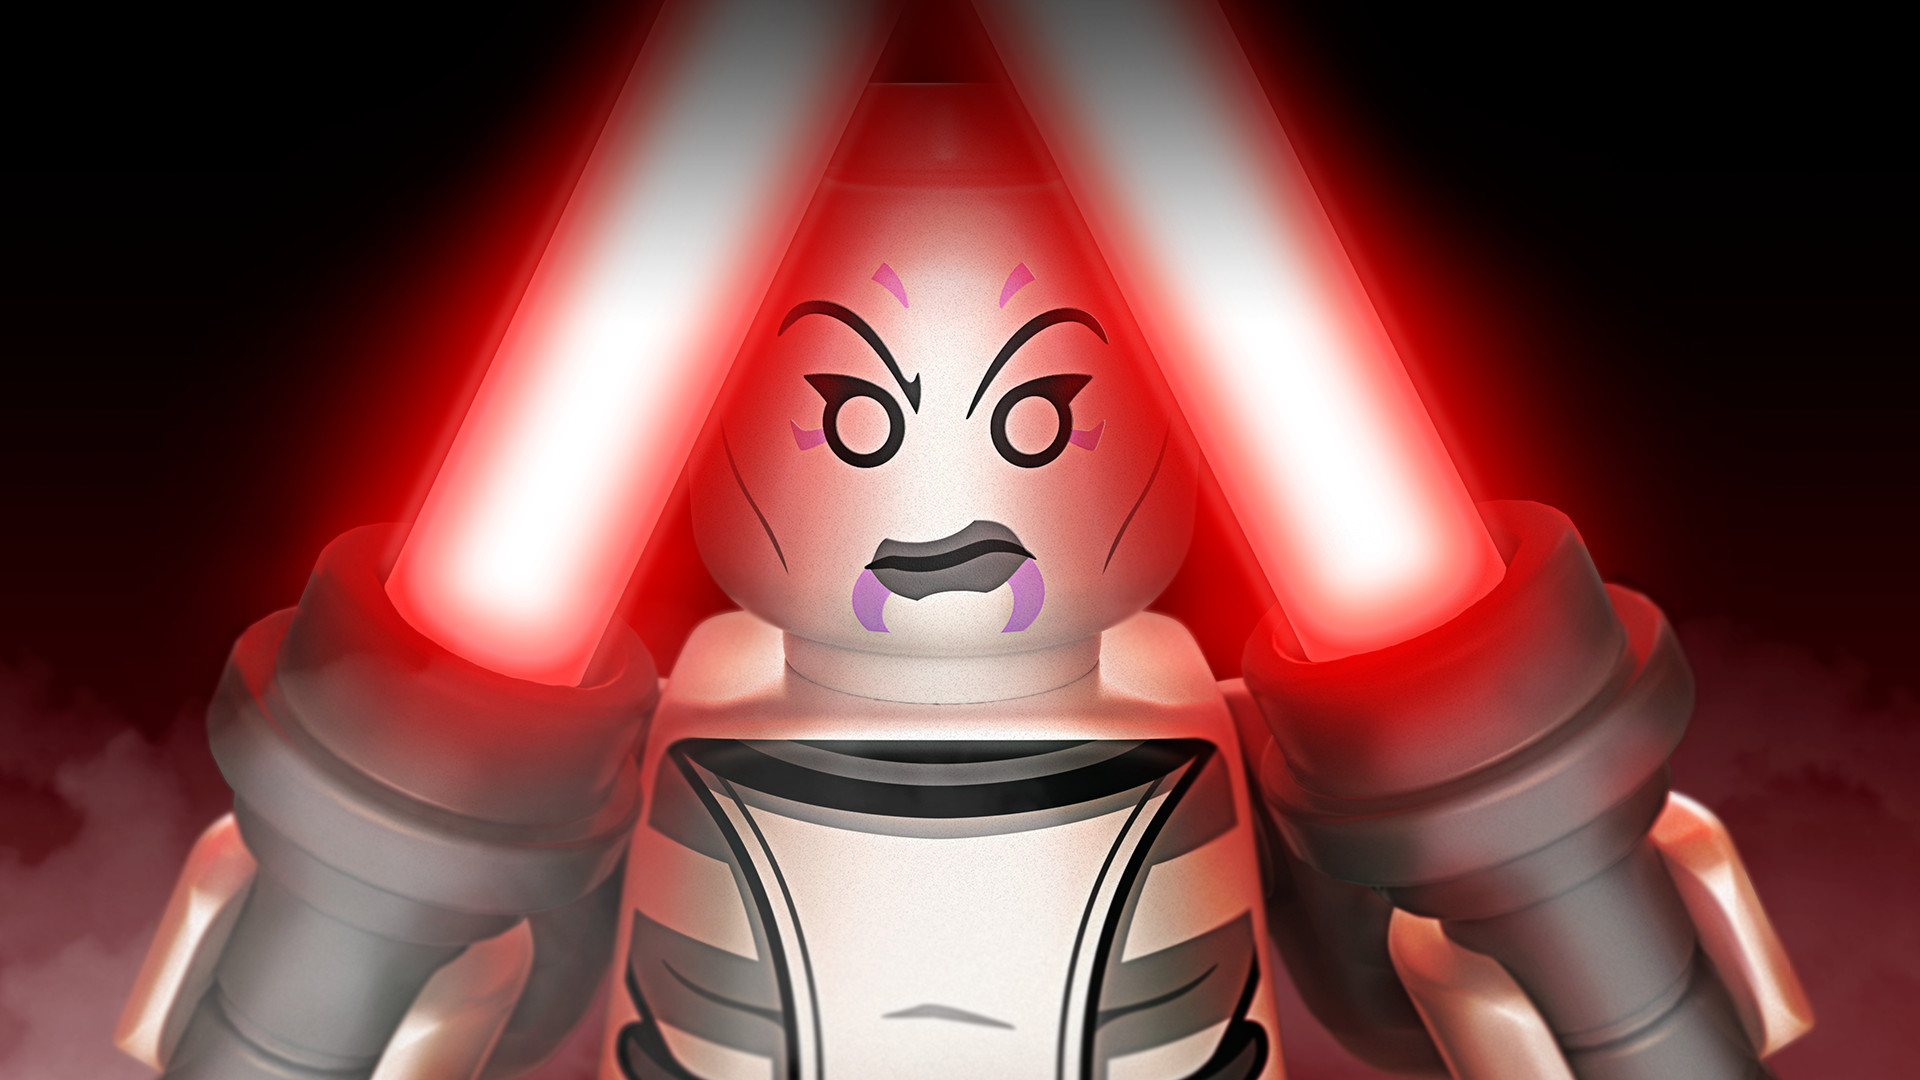 LEGO Star Wars: The Force Awakens - The Clone Wars Character Pack DLC Steam CD Key, 1.68 usd